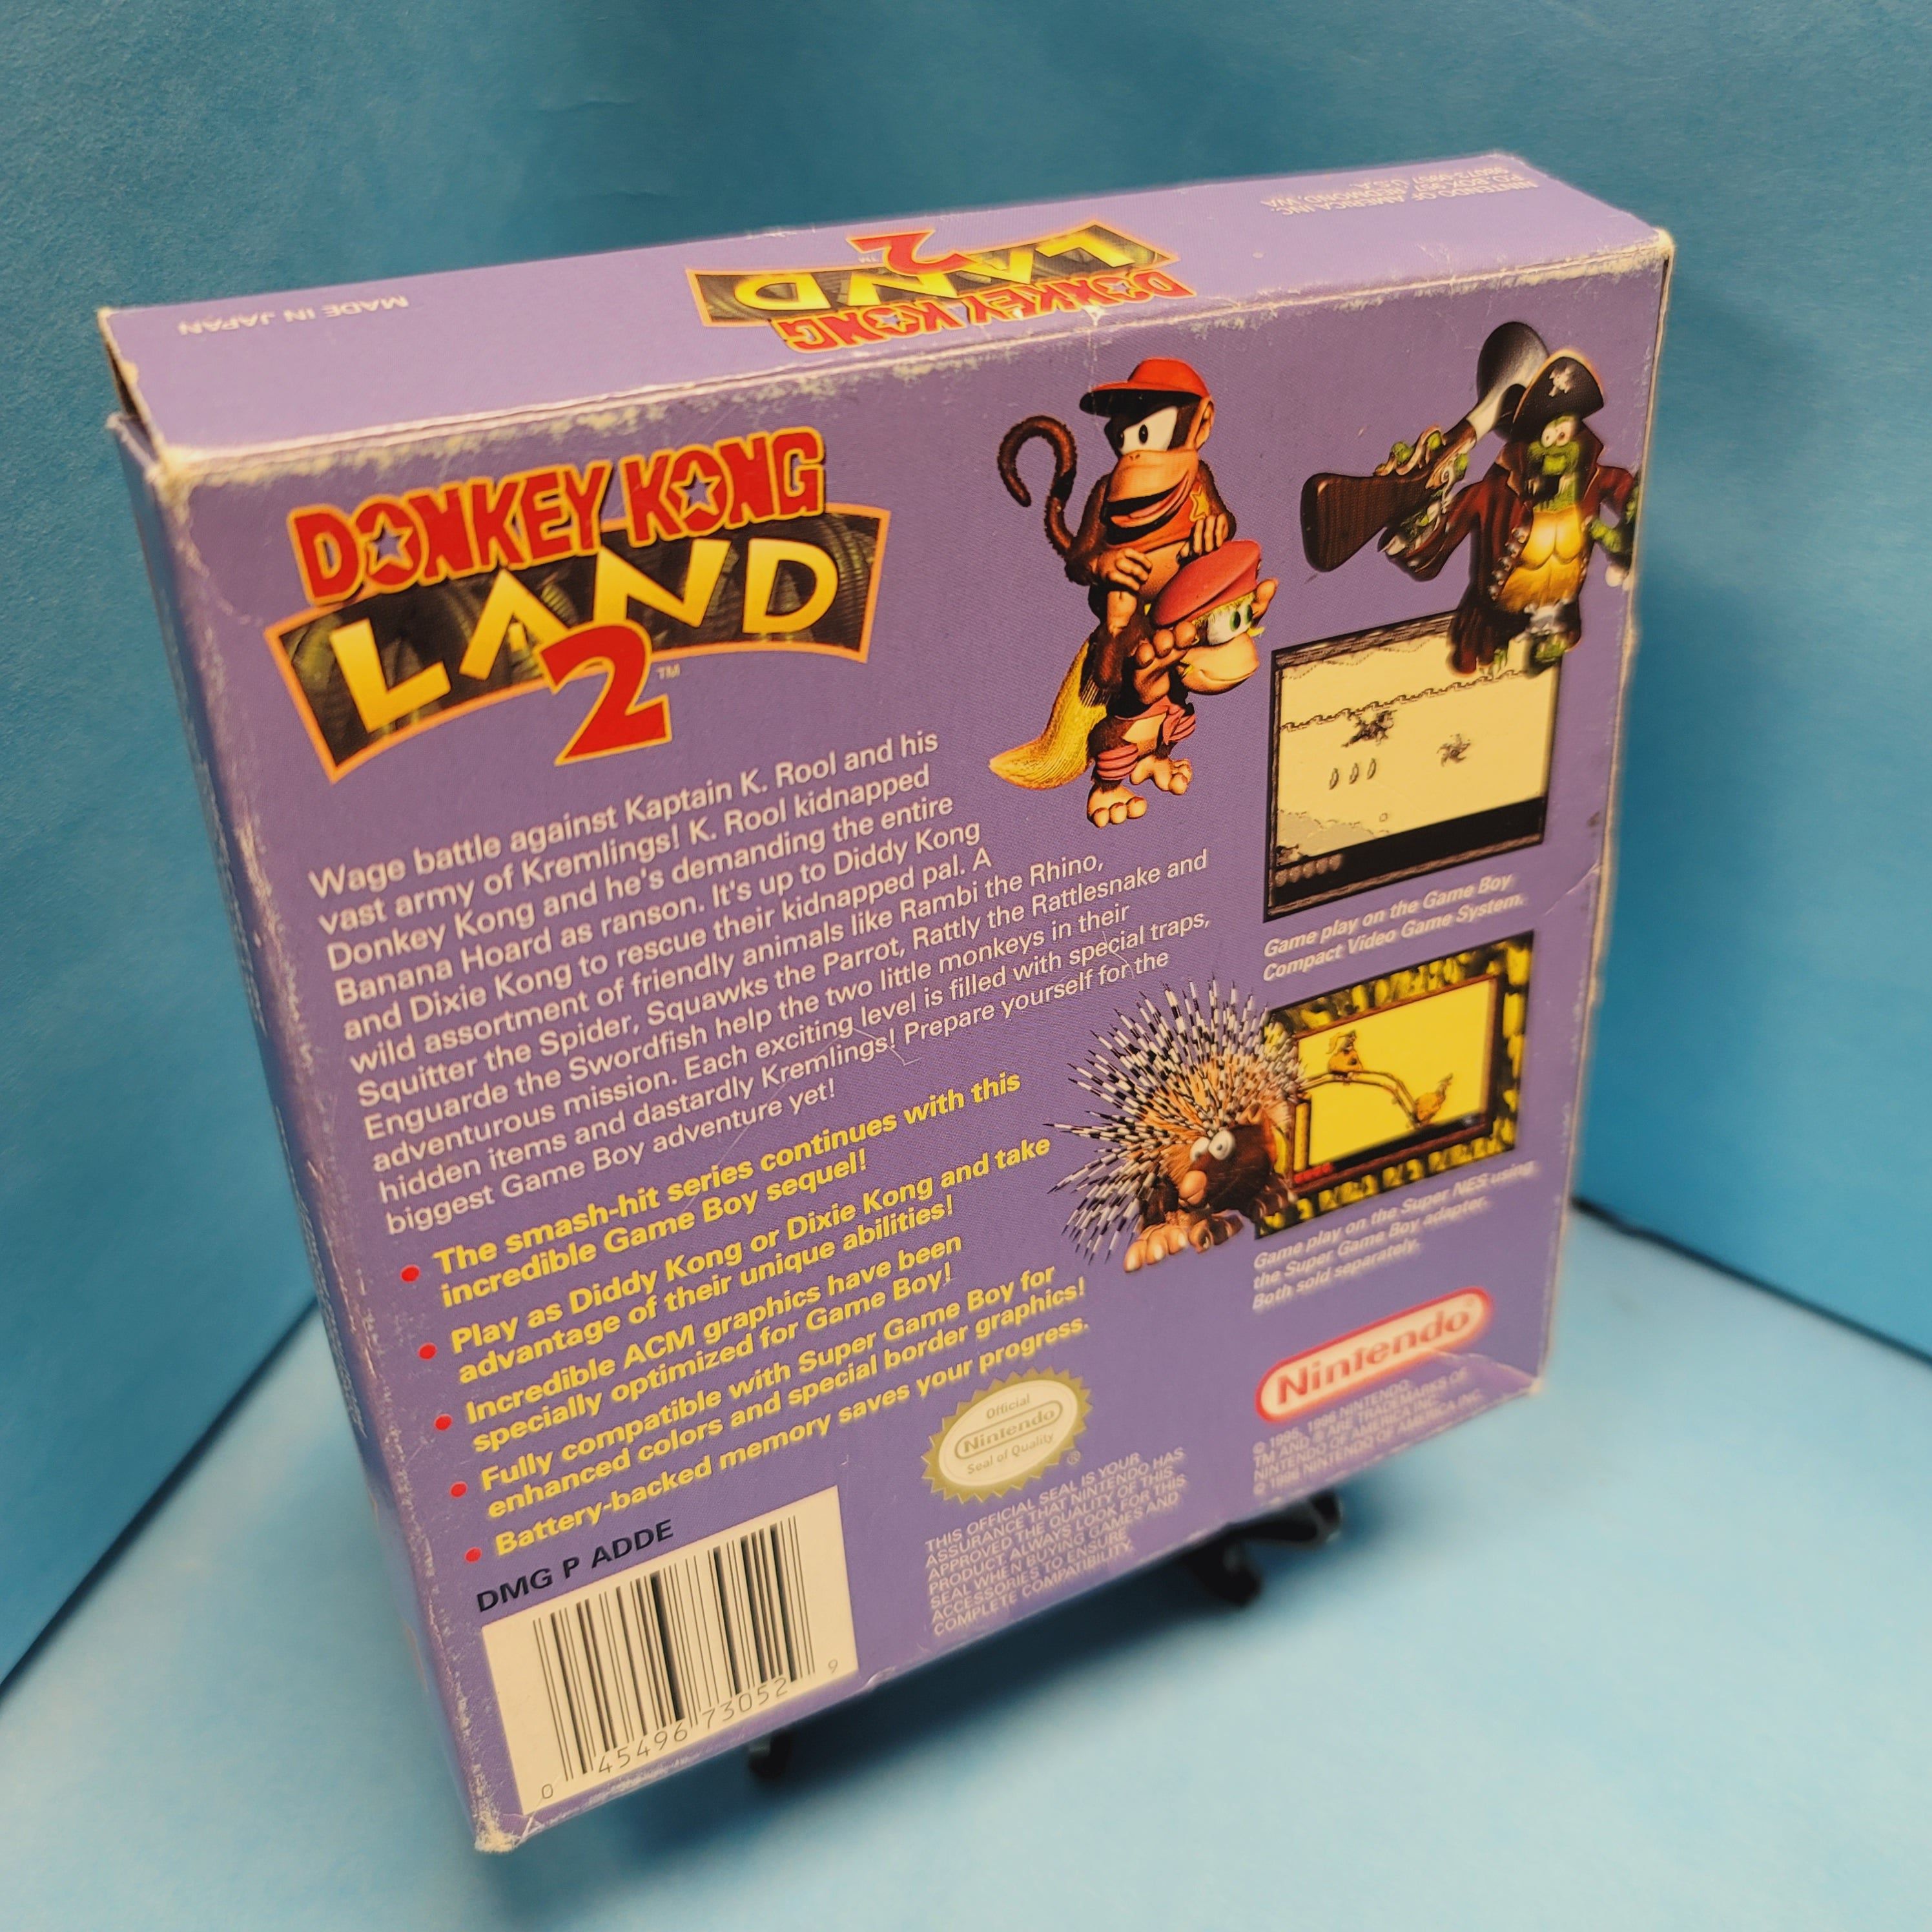 GB - Donkey Kong Land 2 (Complete in Box / B / With Manual)